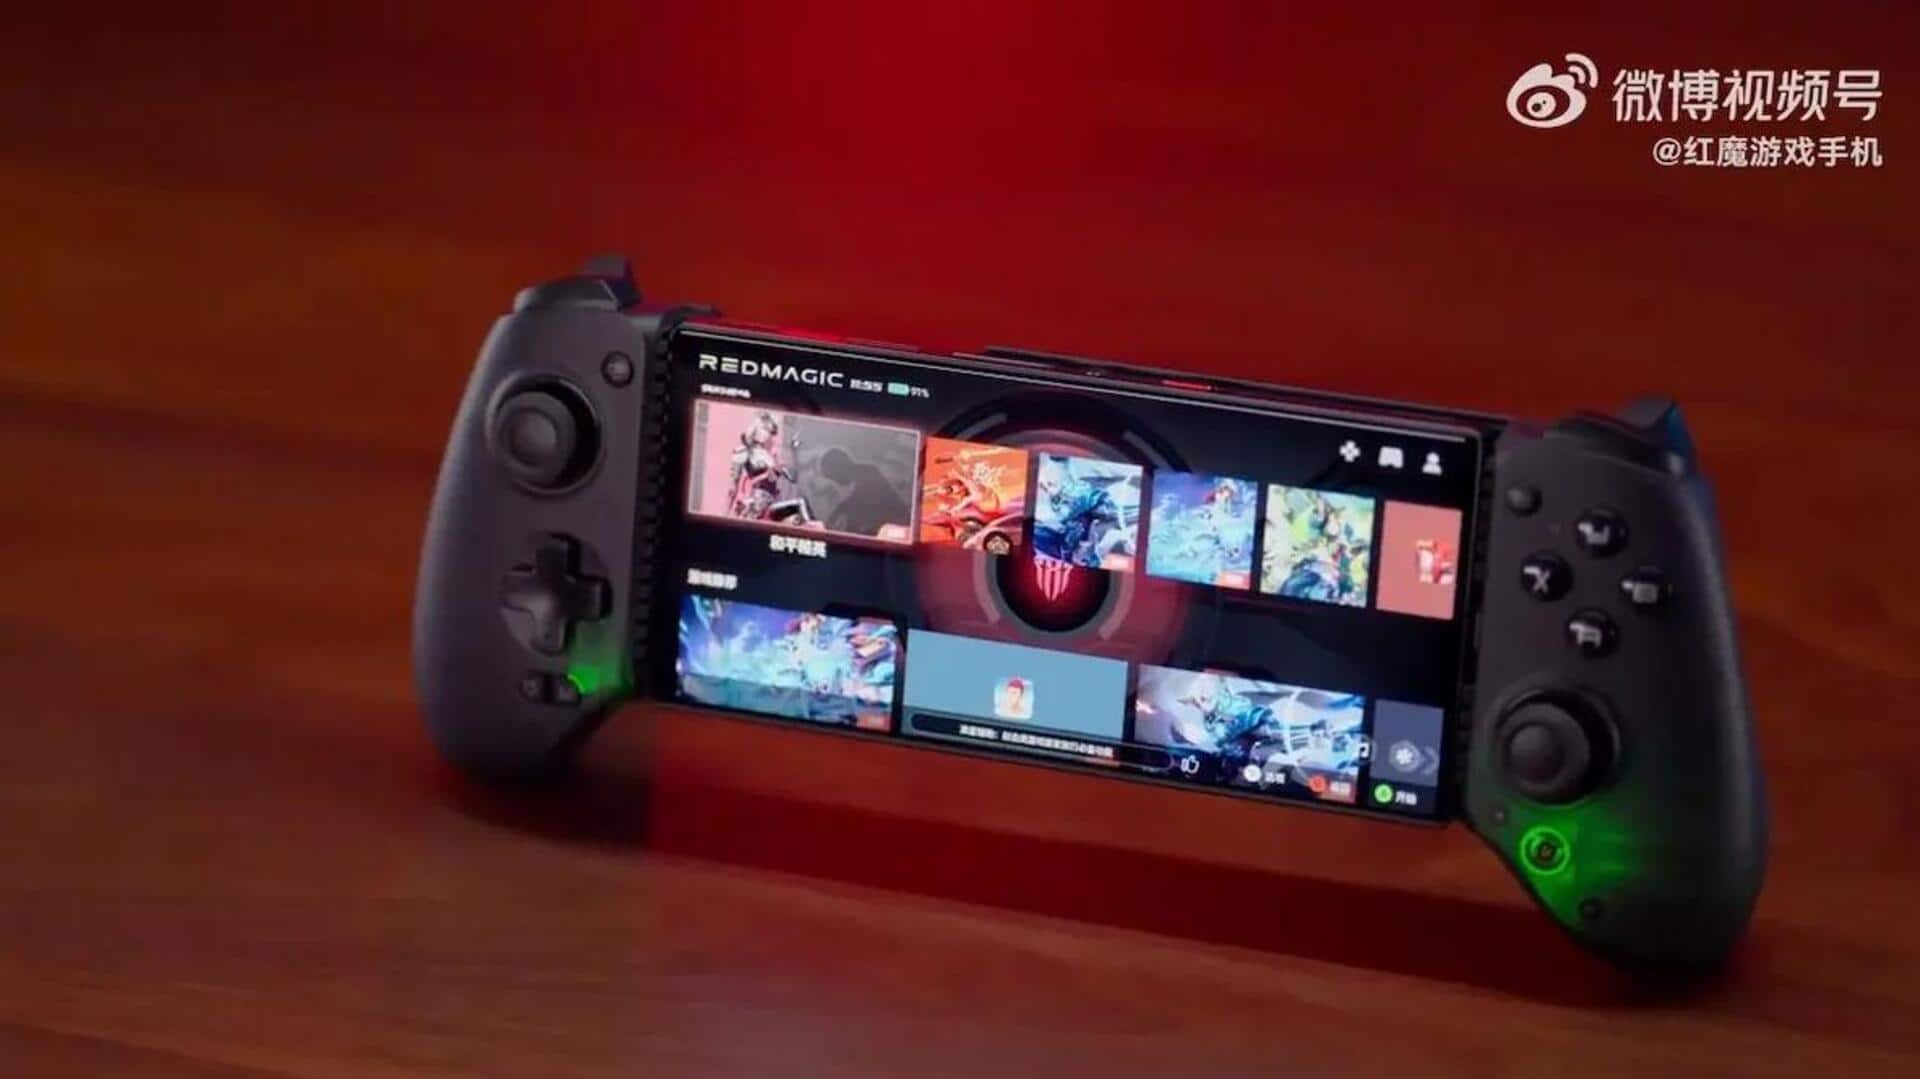 This gadget turns your smartphone into a handheld gaming device